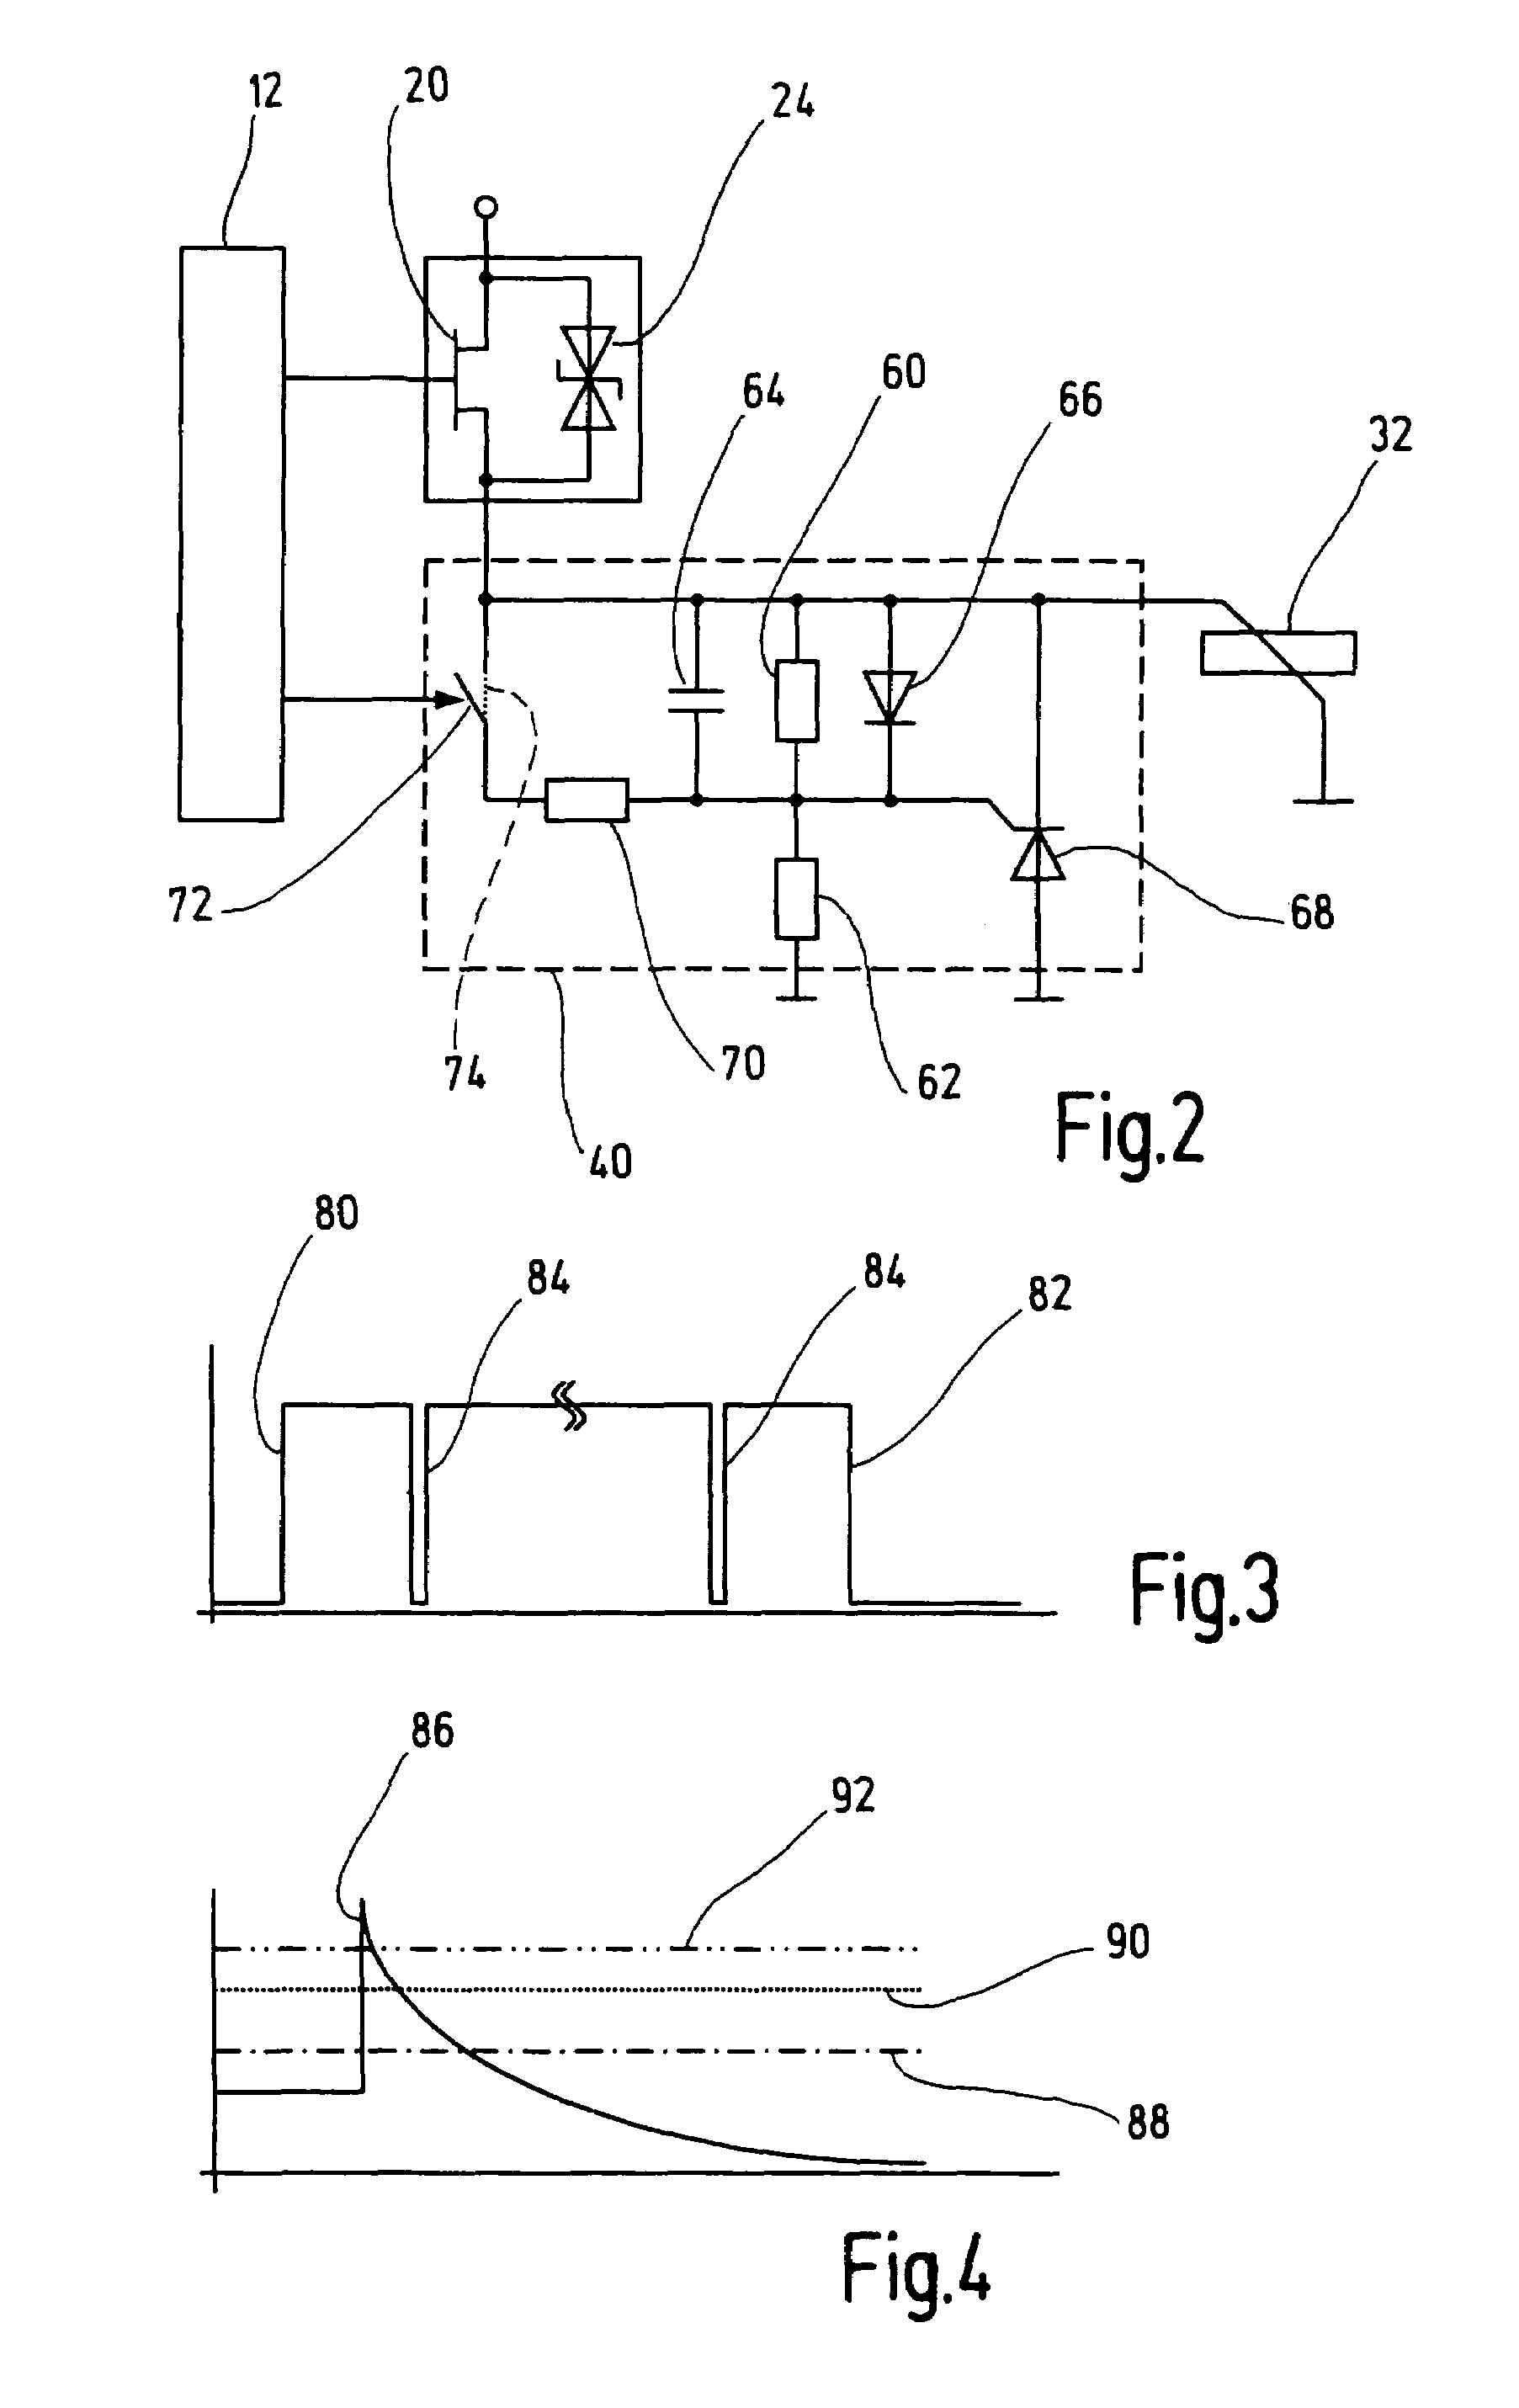 Safety switching device and method for failsafe shutdown of an electric load